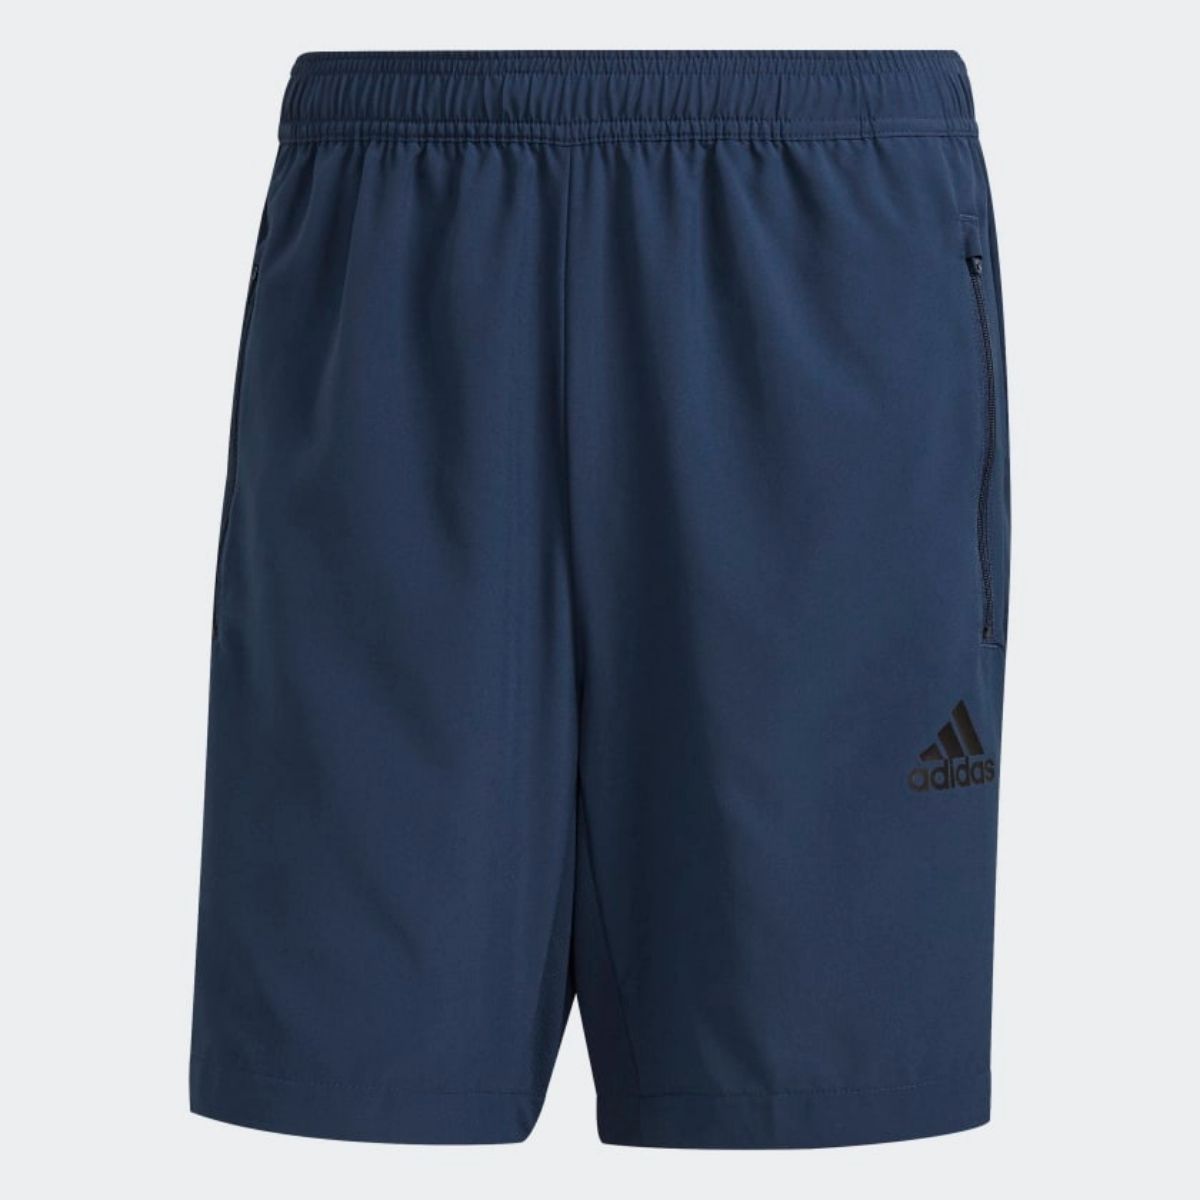 The Best Sale Items from Adidas' Apparel Under $60 - BroBible